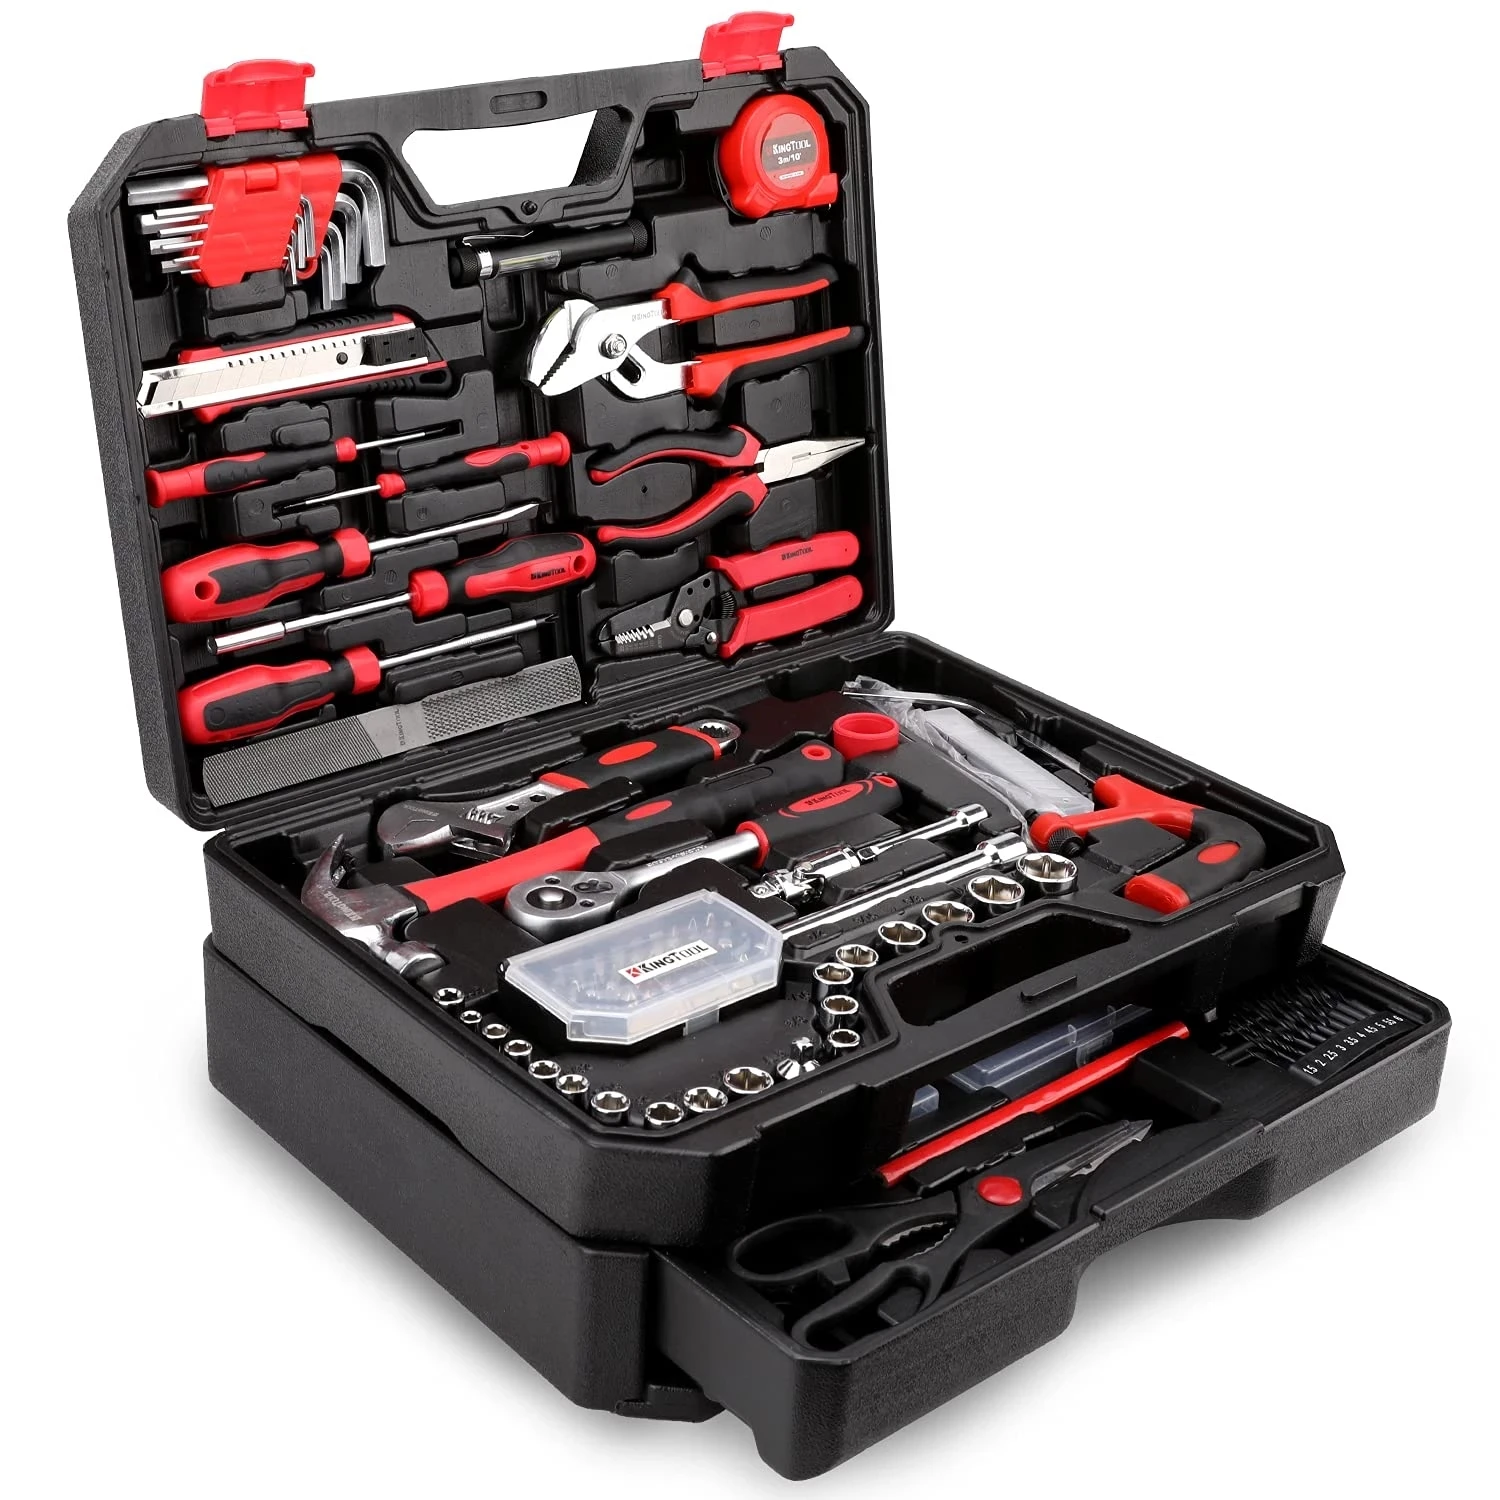 

2023 New New 325 Piece Home Repair Tool Kit General Home/Auto Repair Tool Set Toolbox Storage Case with Drawer Metal Wall Plate